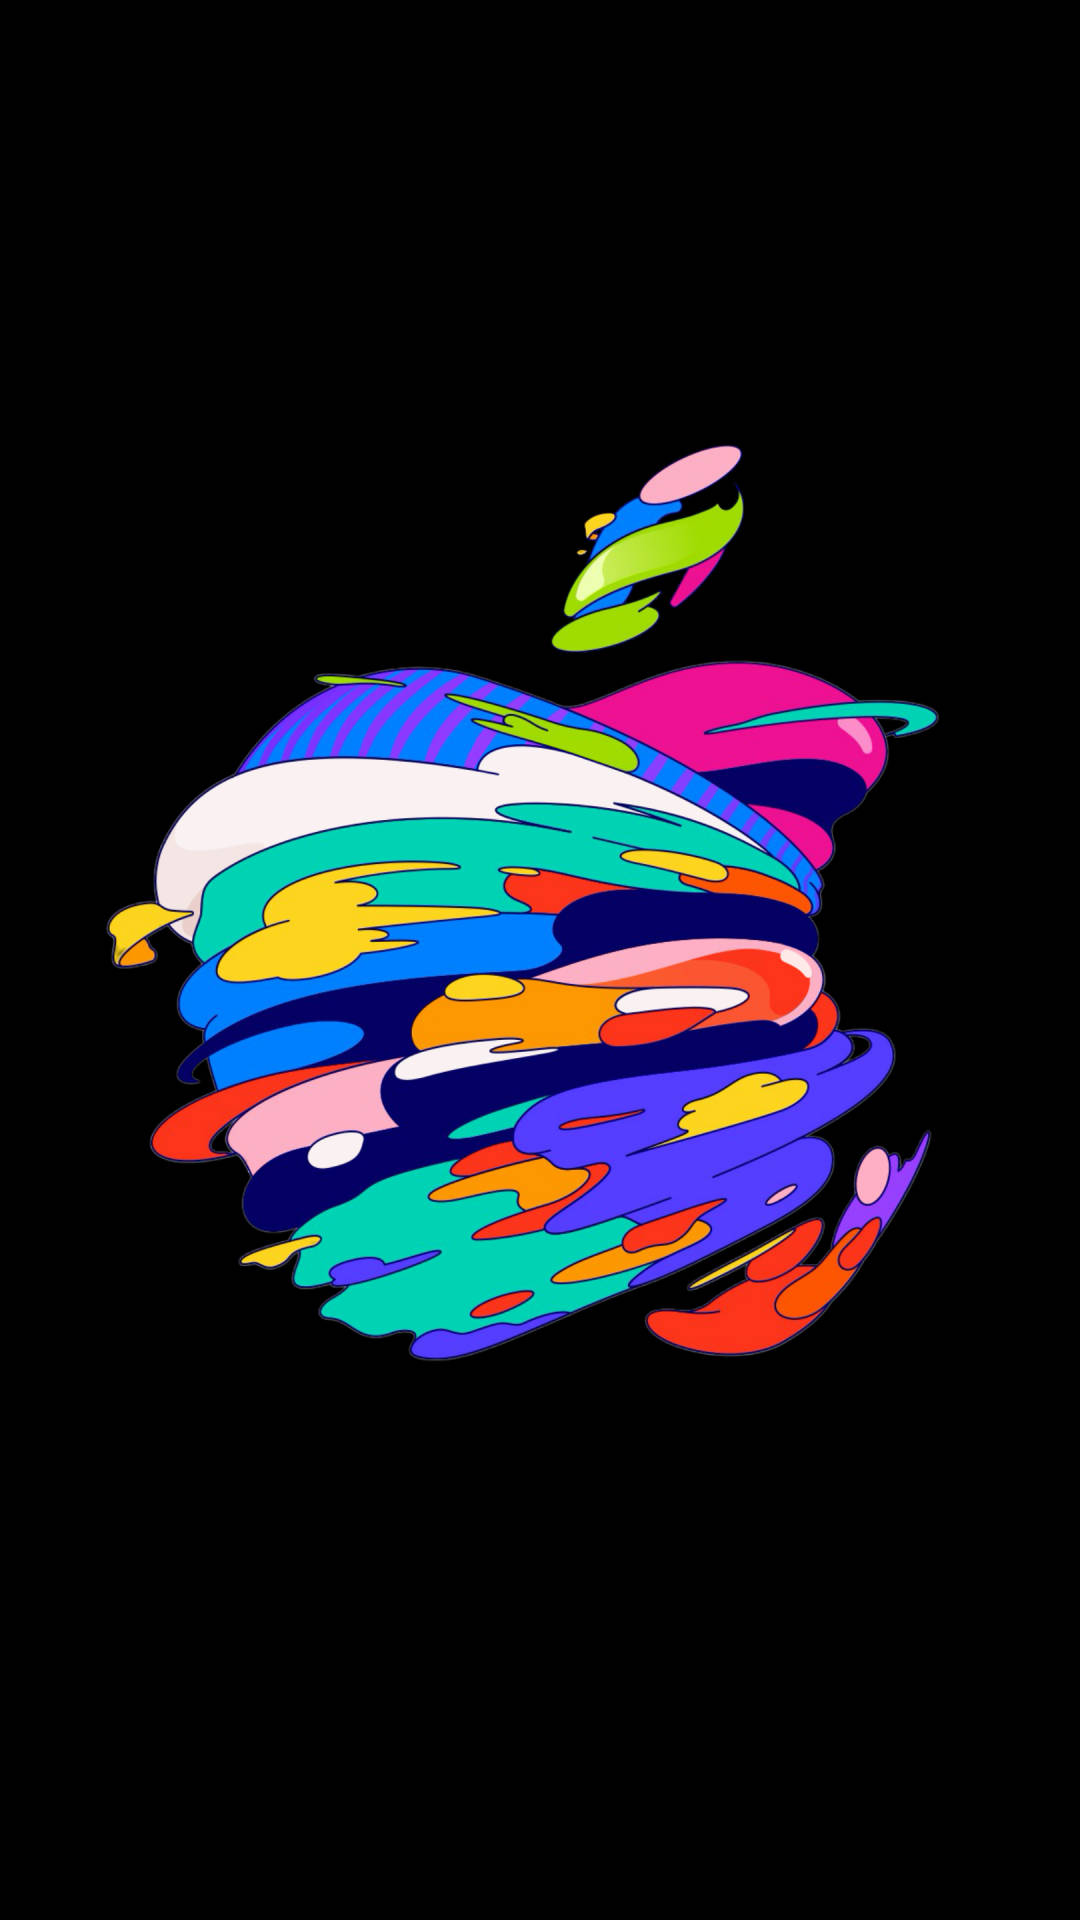 Apple Logo With Colorful Paint On A Black Background Wallpaper